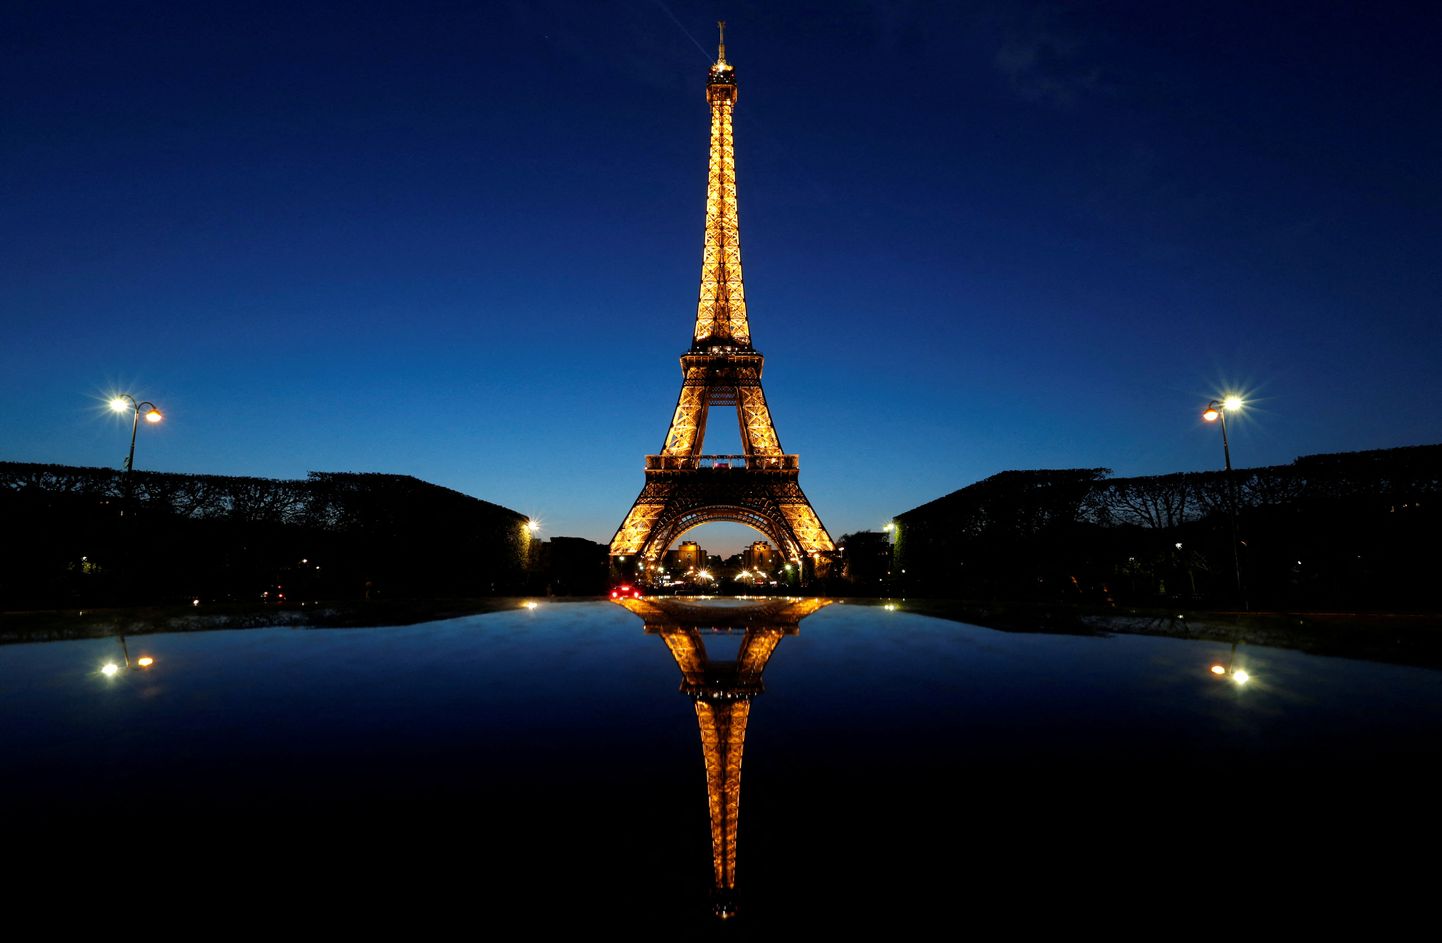 FILE PHOTO: A night view shows the Eiffel tower, reflected in a car's roof, in Paris, France, April 30, 2016. REUTERS/Christian Hartmann/File Photo